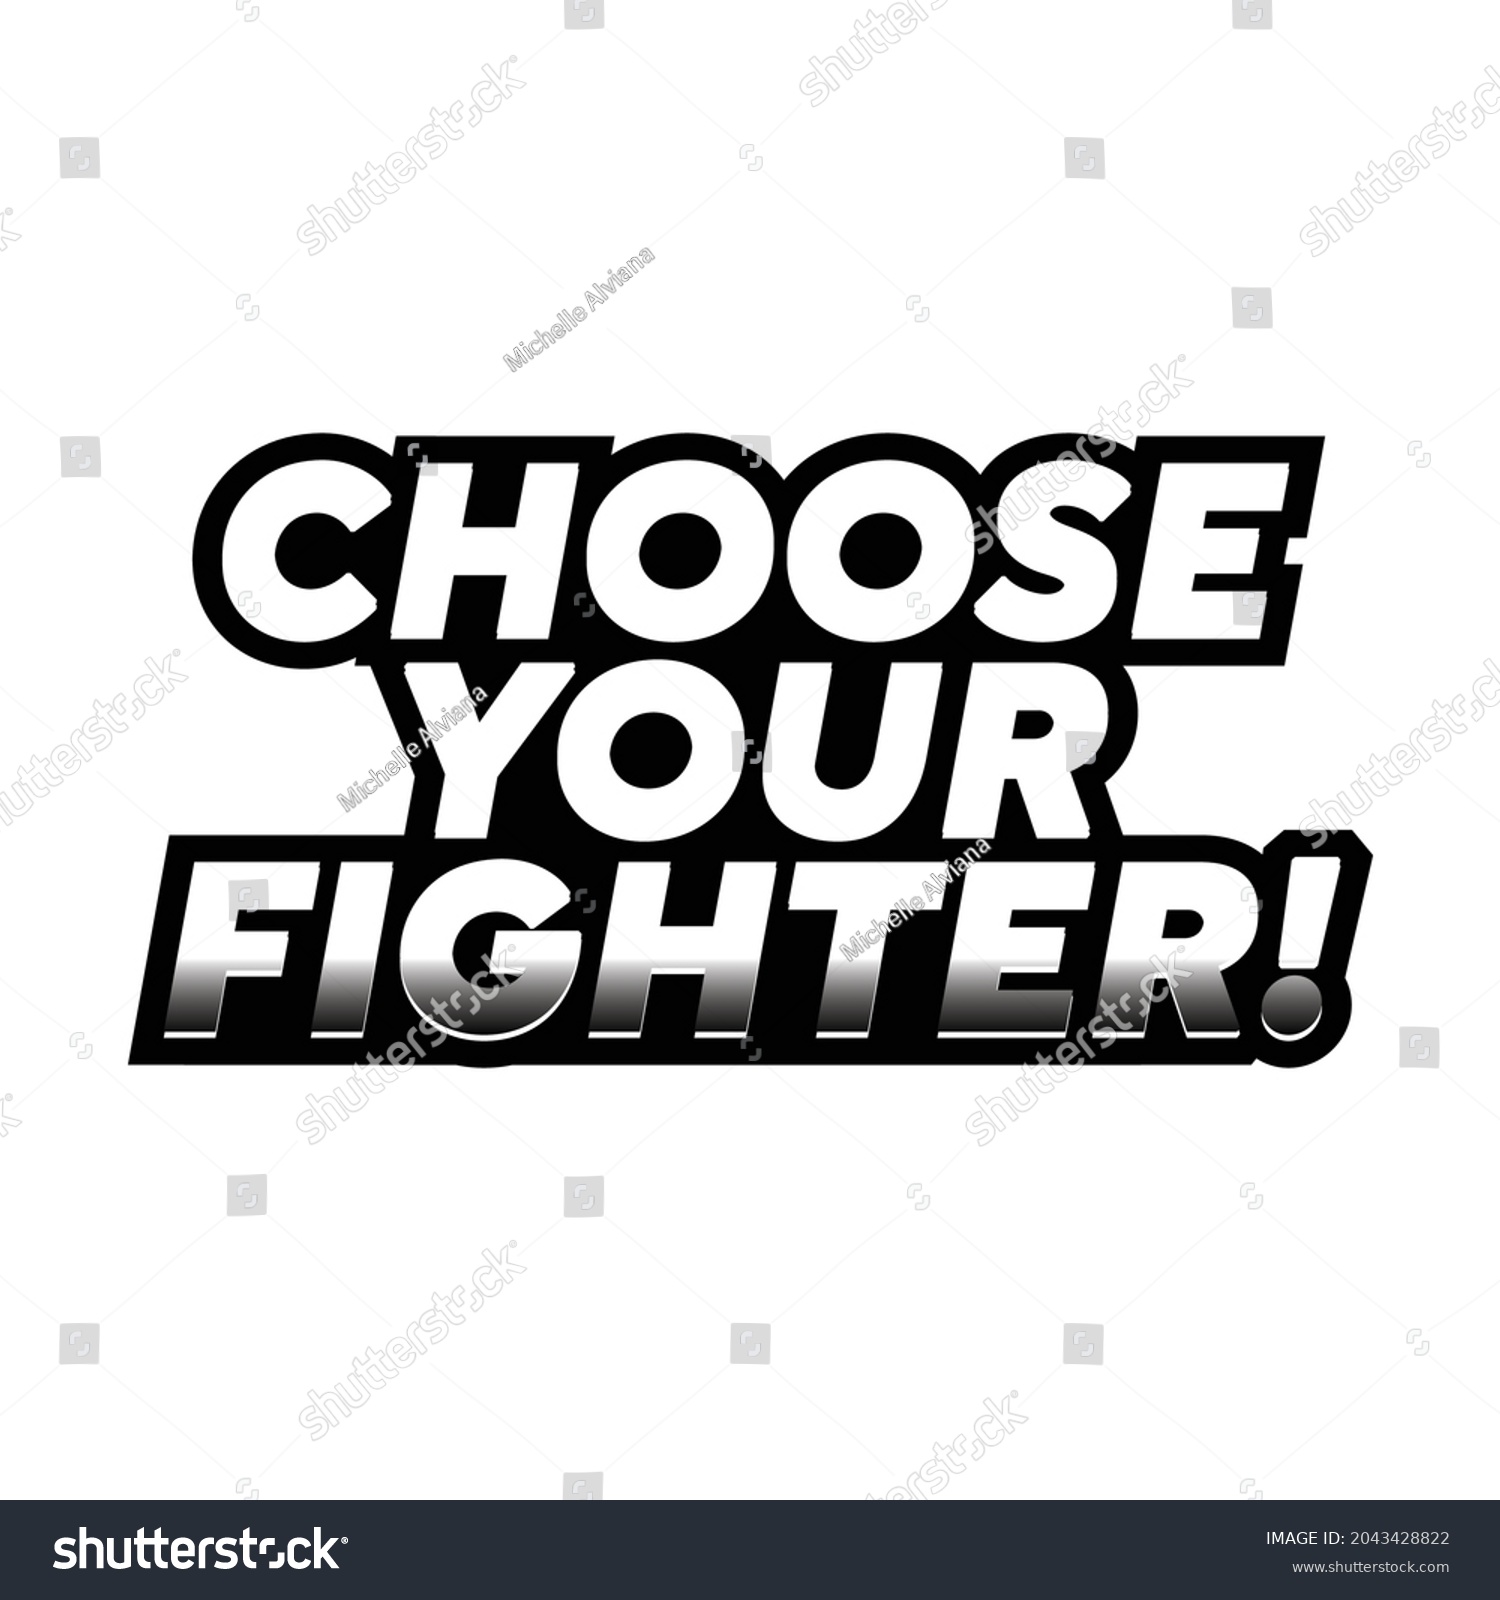 Choose Your Fighter Title Design Stock Vector (Royalty Free) 2043428822